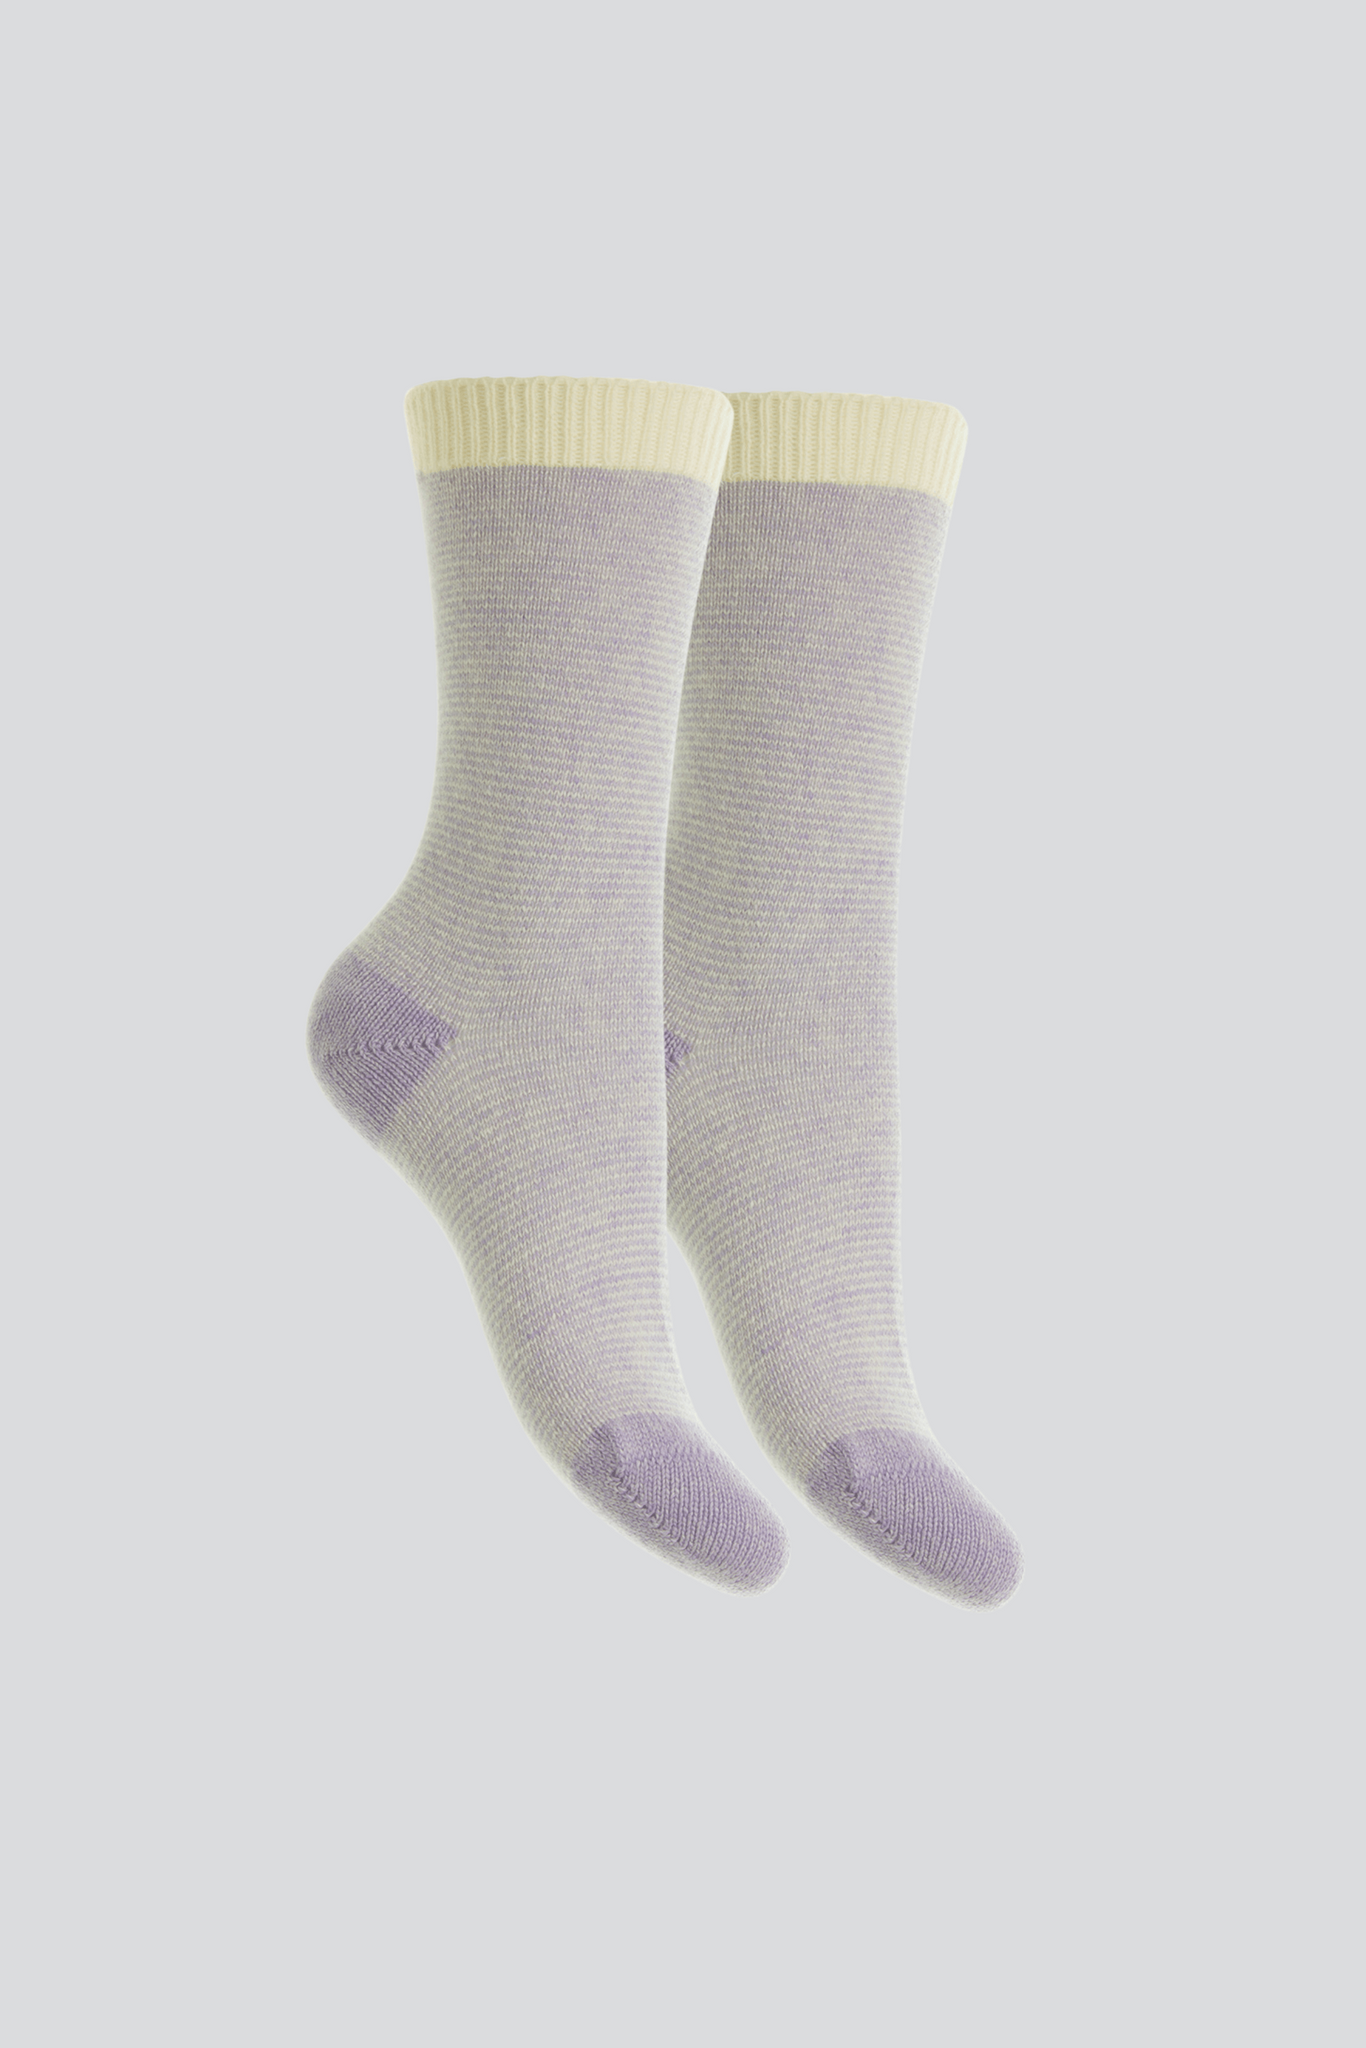 Womens Striped Cashmere Bed Socks | Lilac Striped Cashmere Socks | Quality women's Socks - Gifts for Her by Lavender Hill Clothing